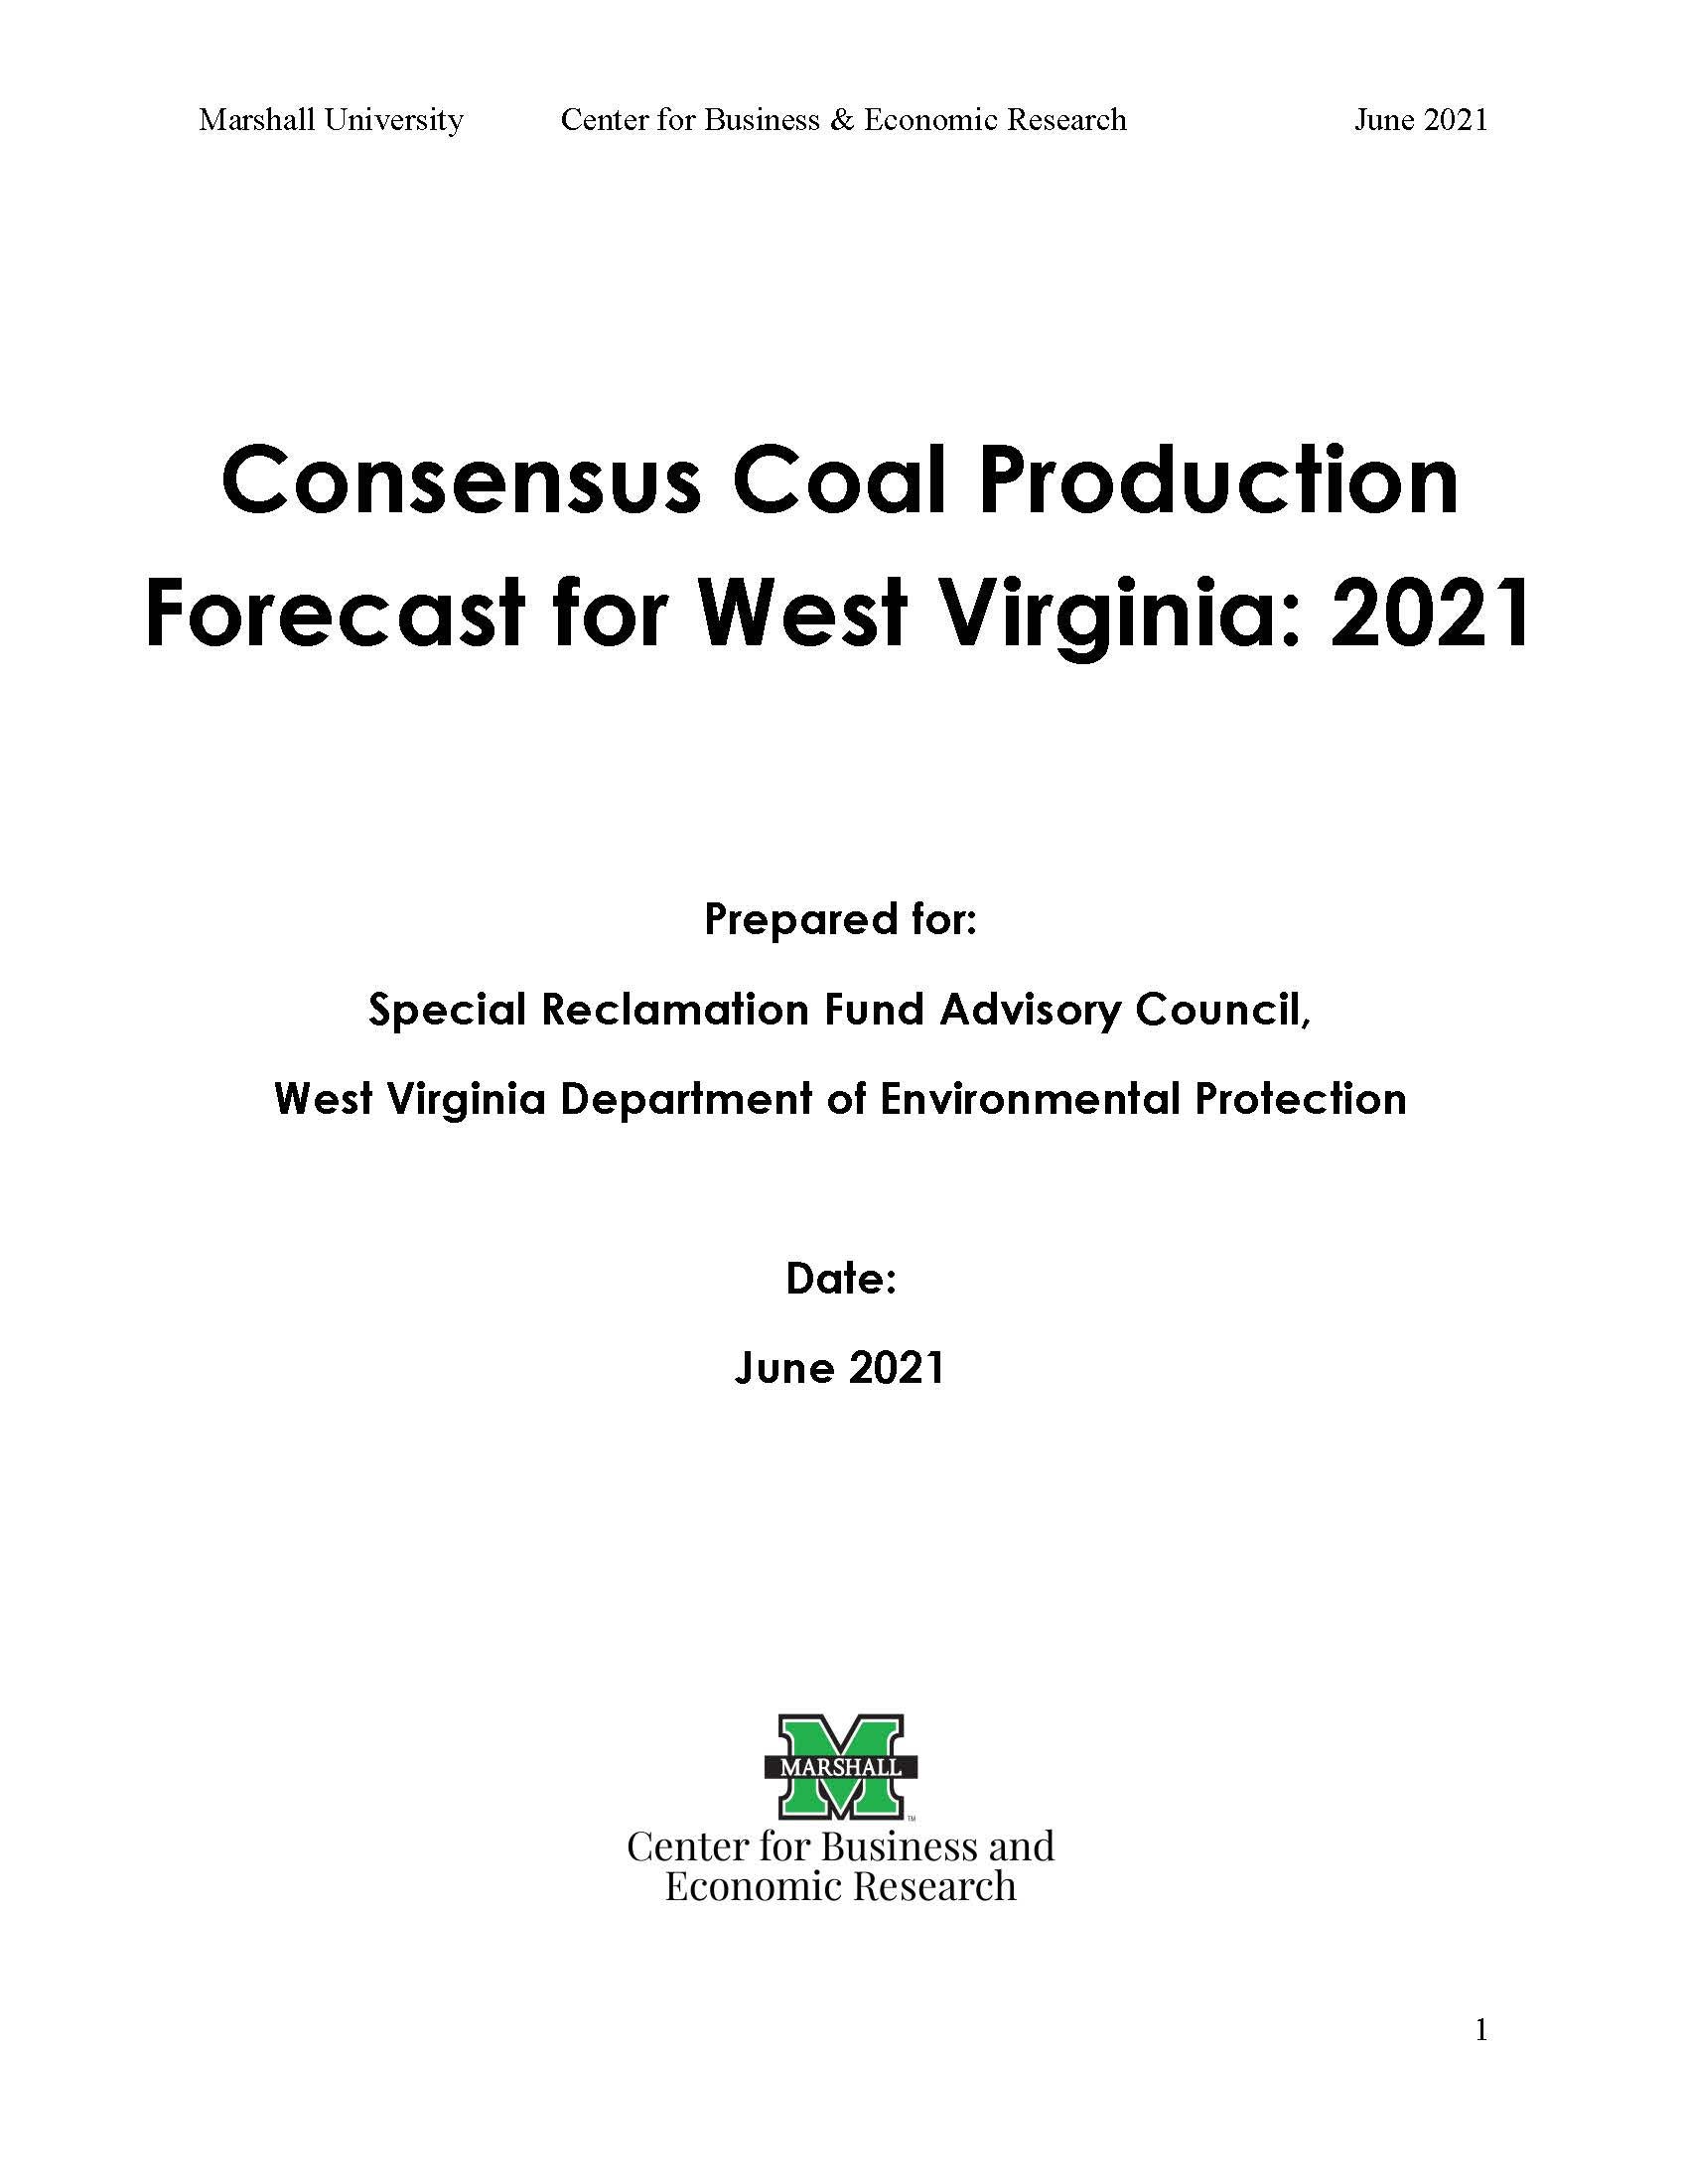 2021_06_21-WV_Consensus_Coal_Production_Forecast_Page_01